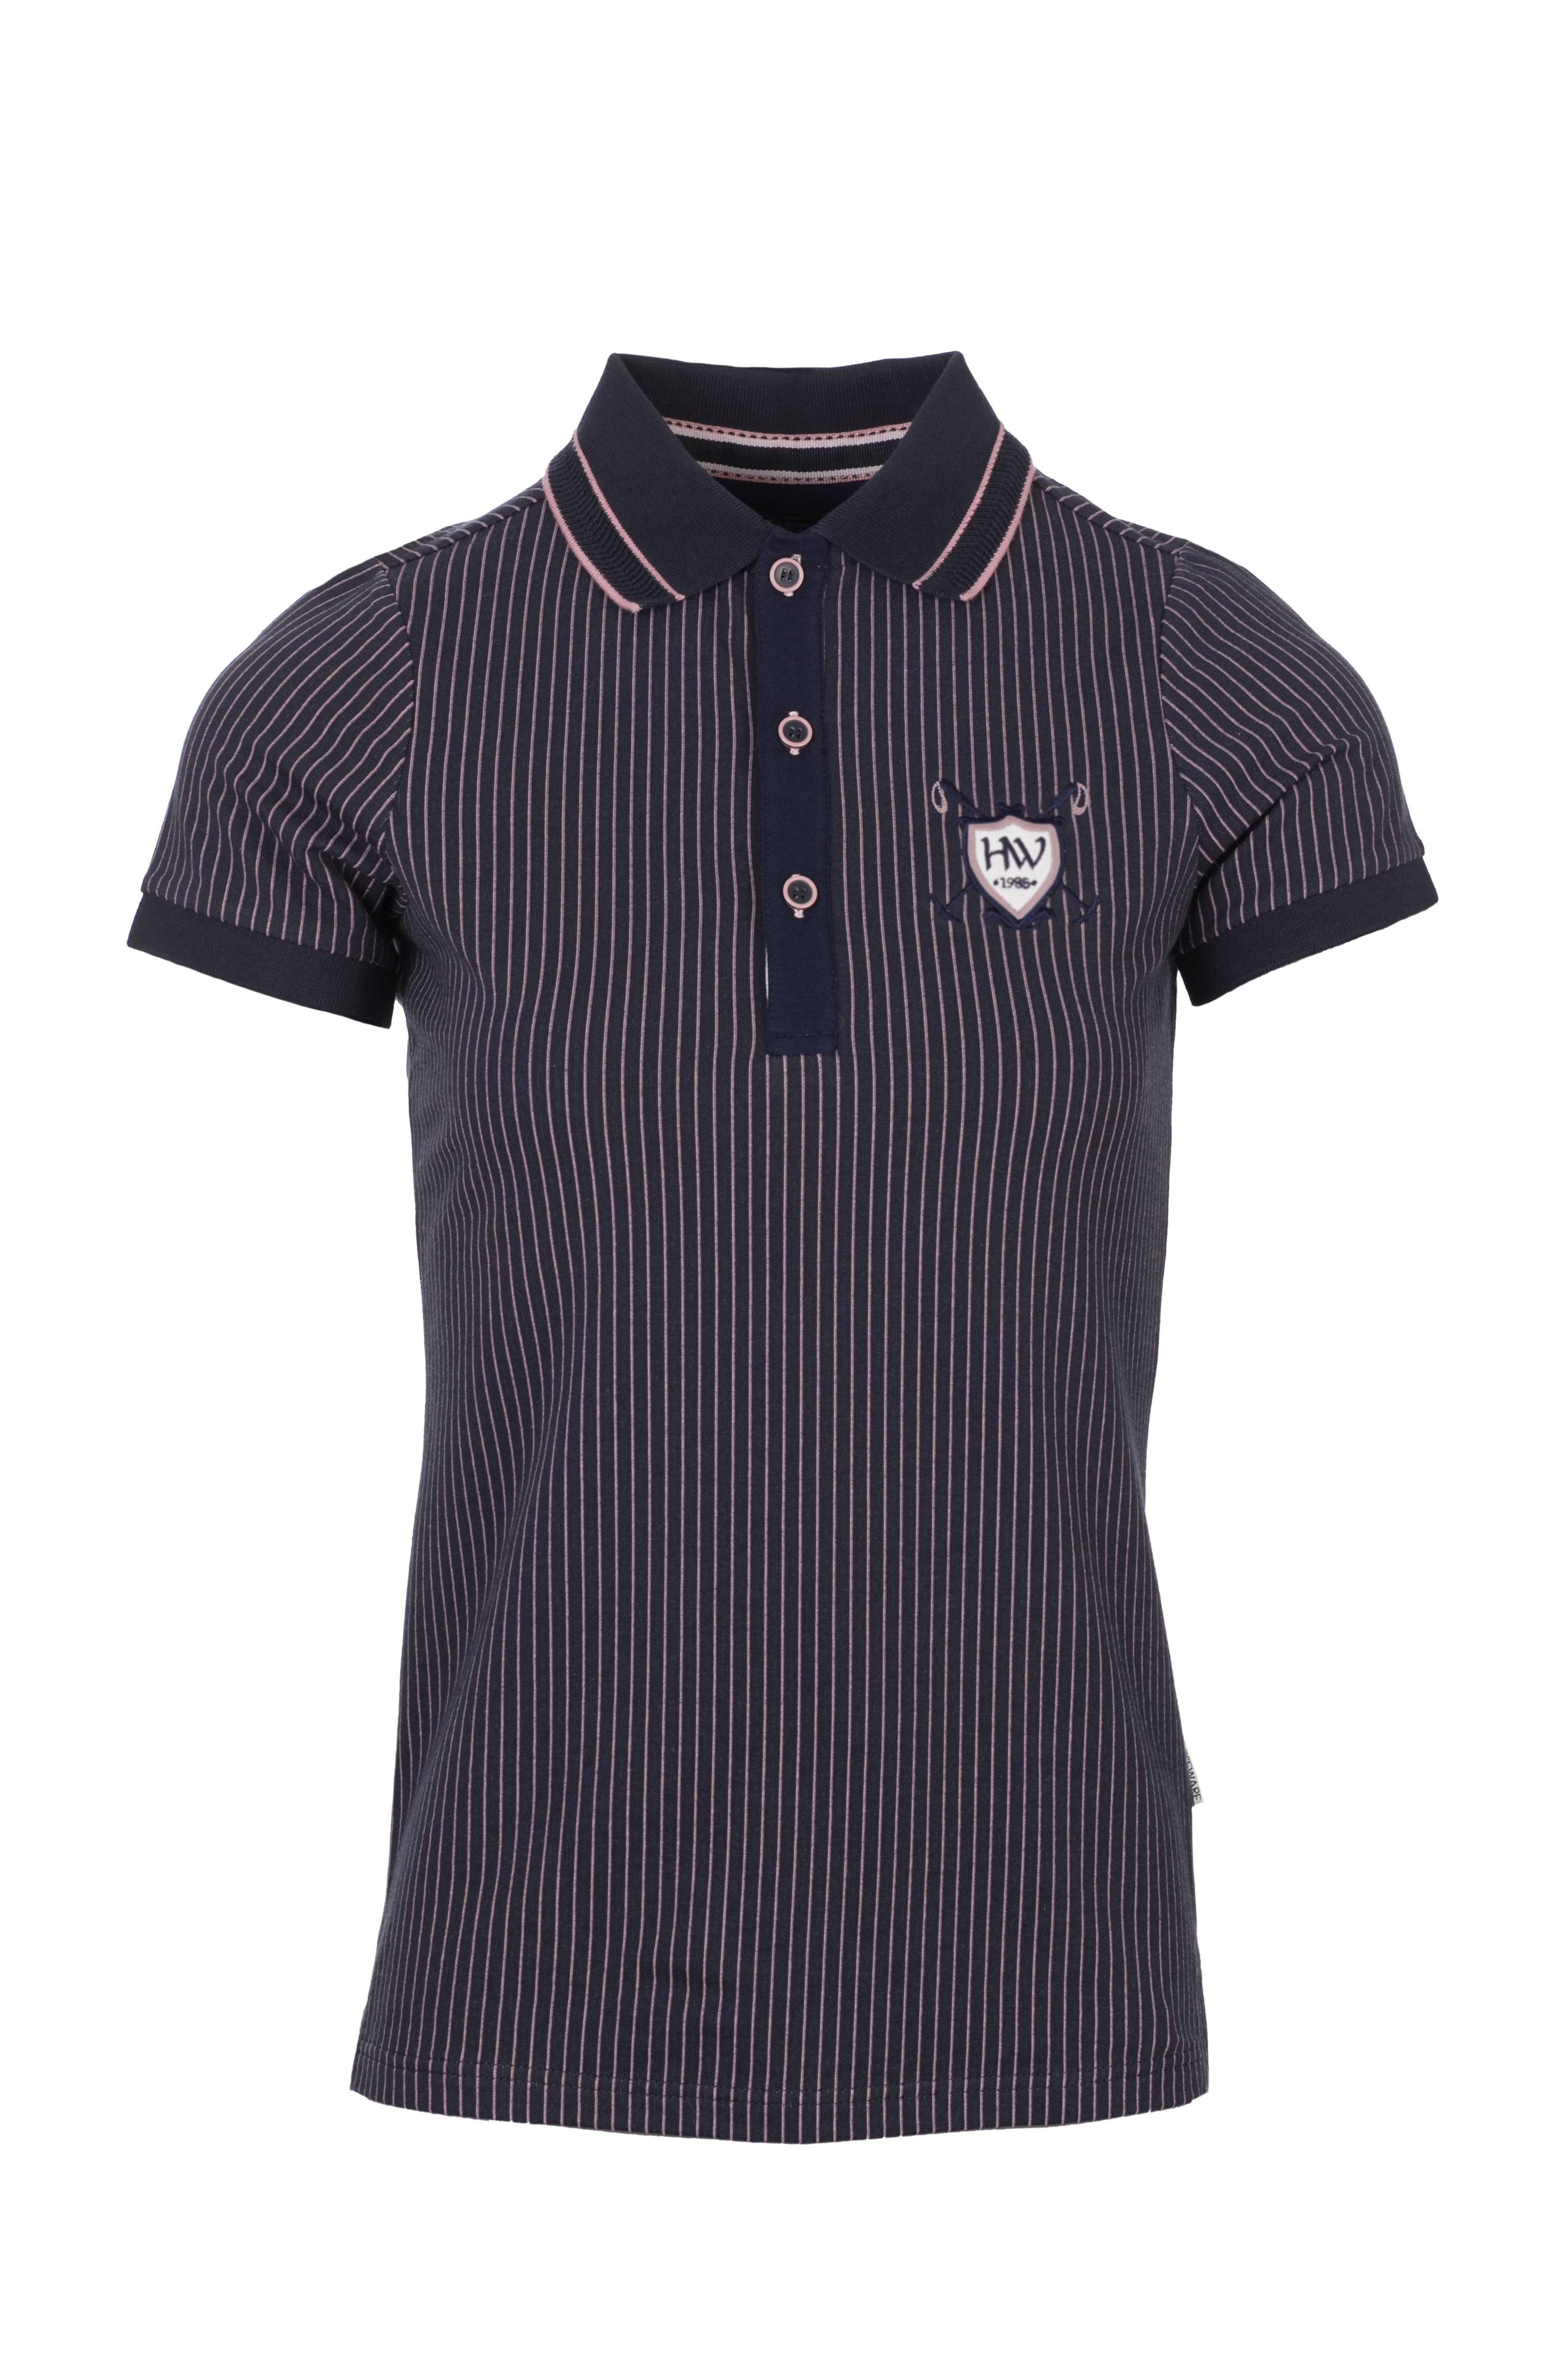 Horseware Ladies Tilly Jersey Polo 